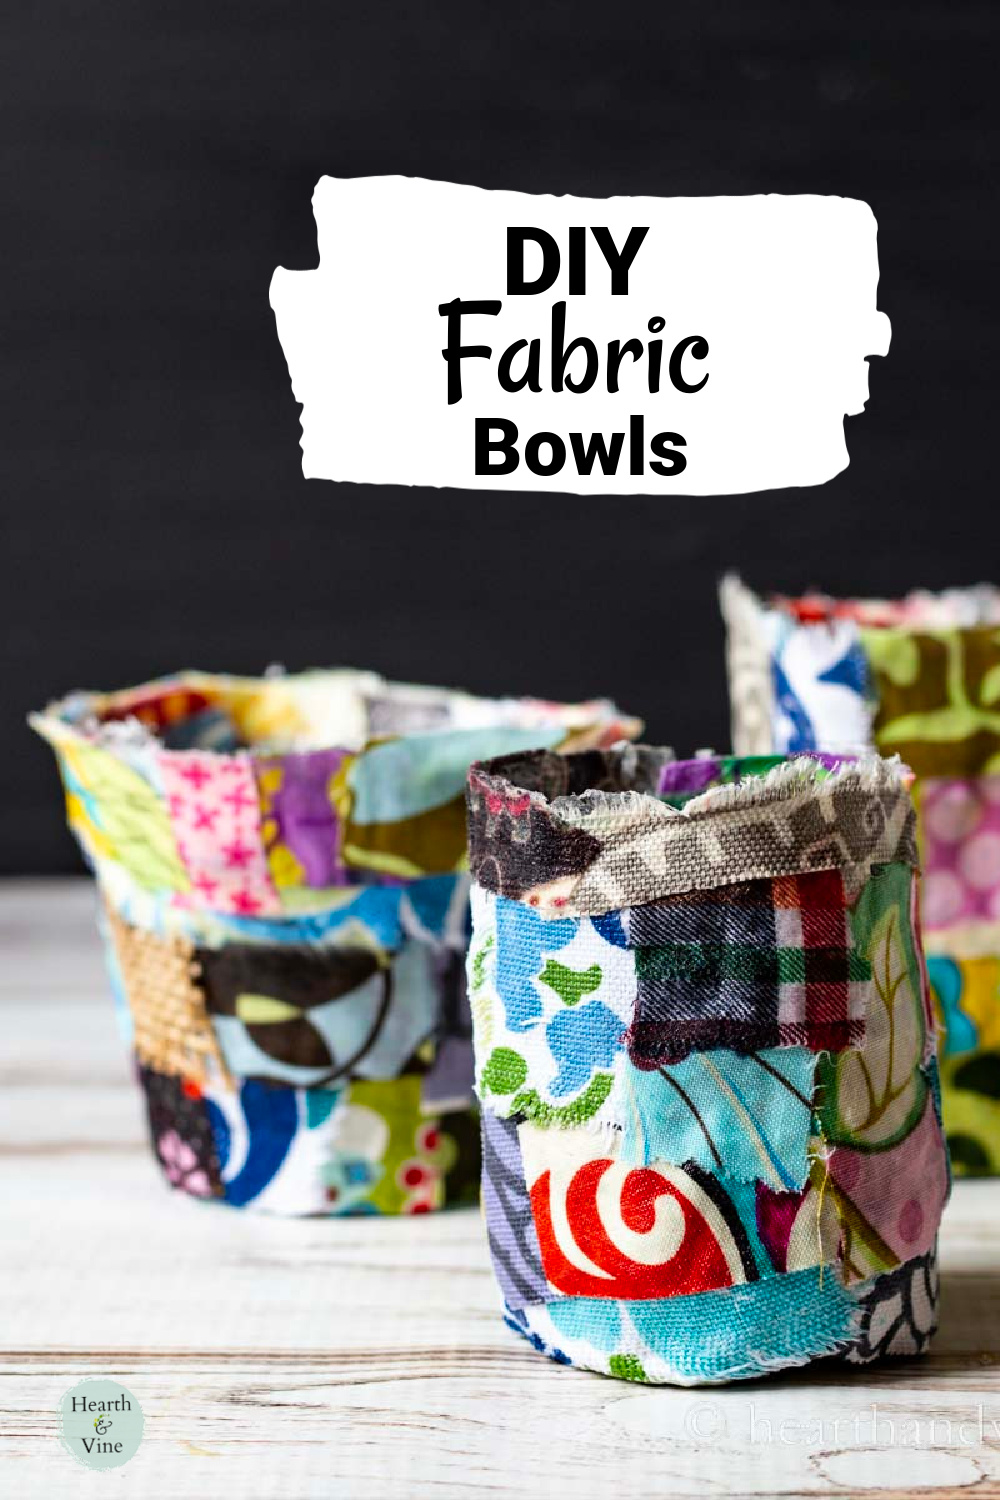 How to Make Fabric Bowls